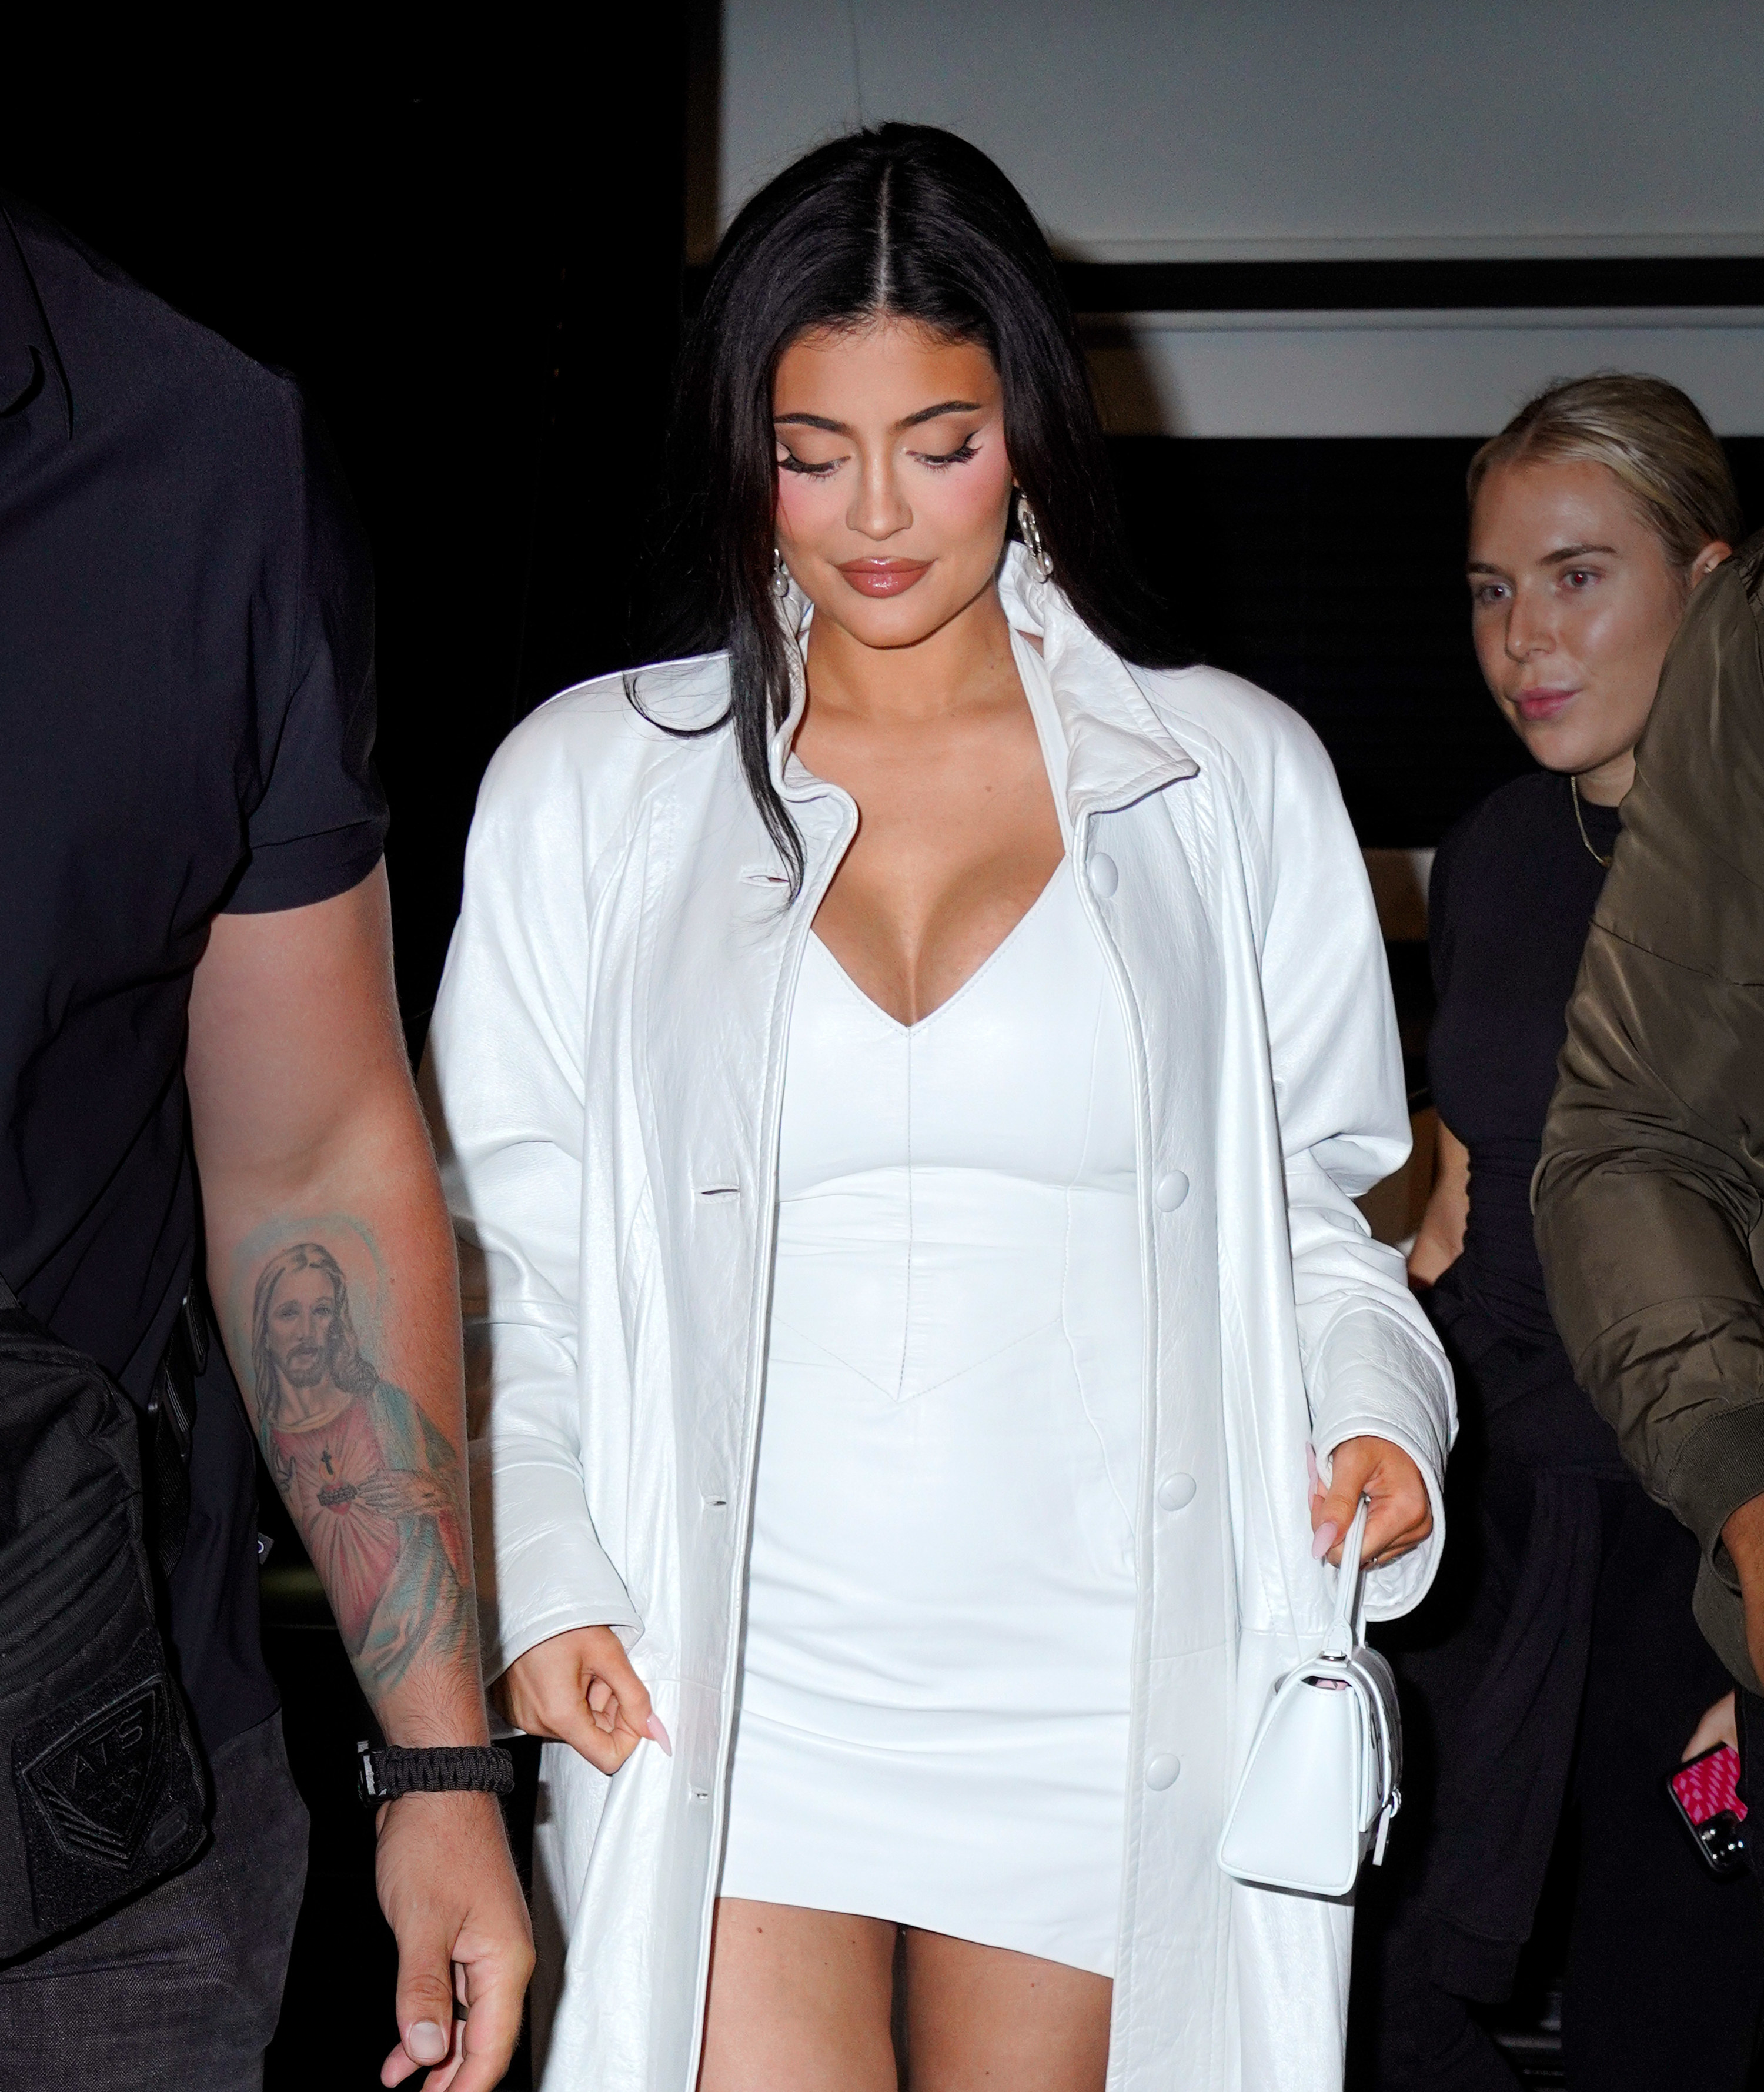 Kylie walks out of a building while wearing a big coat